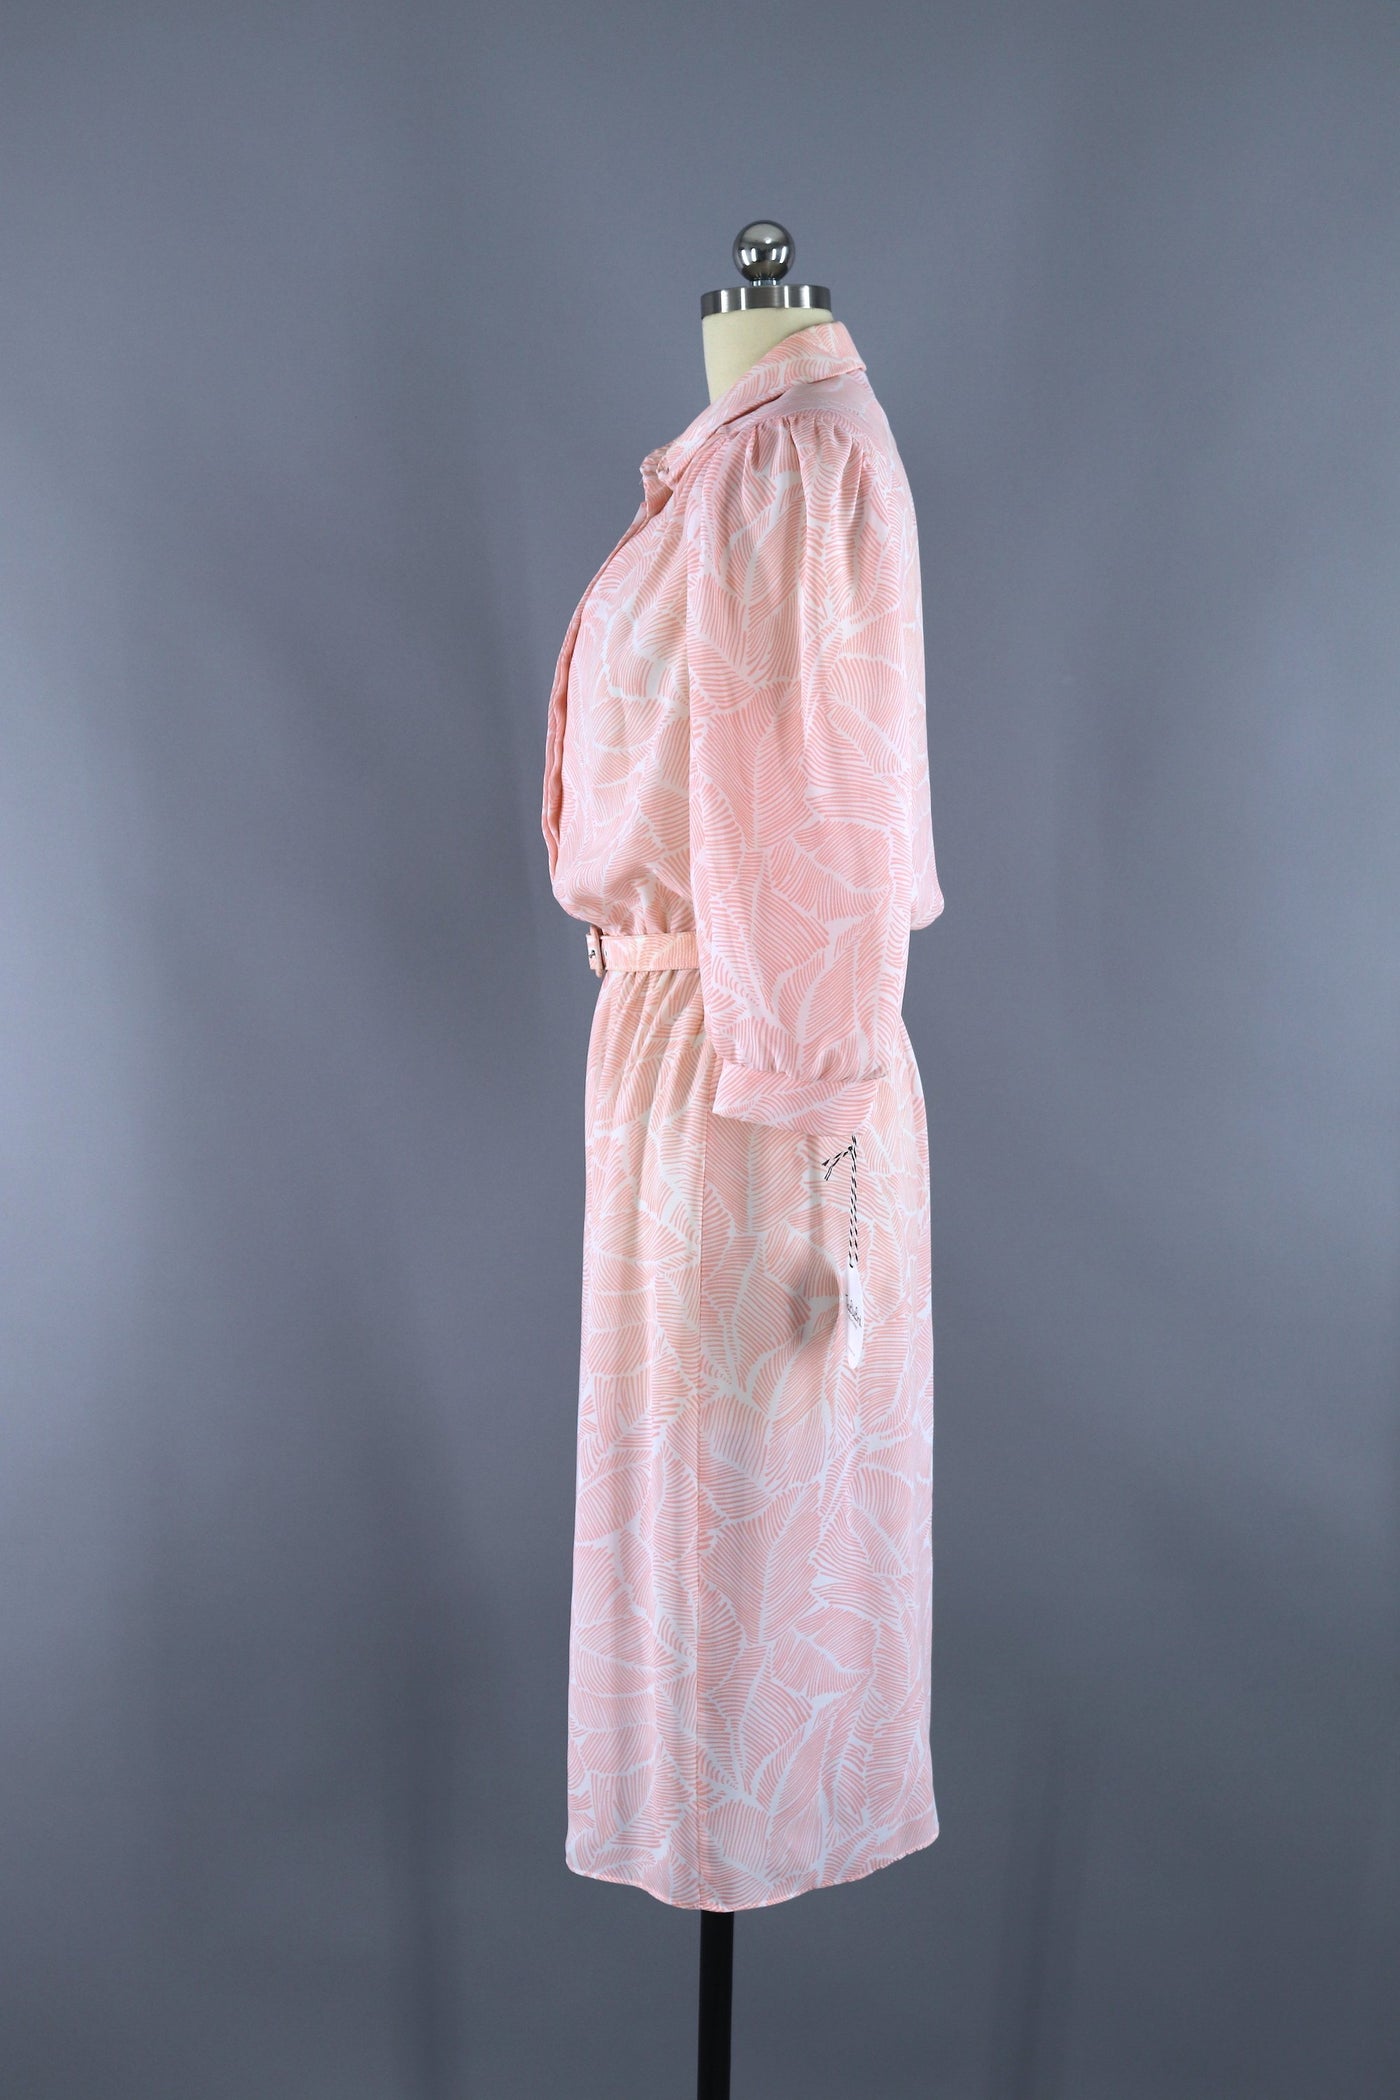 Vintage 1980s Day Dress / Peach Pink Palm Leaves Print - ThisBlueBird